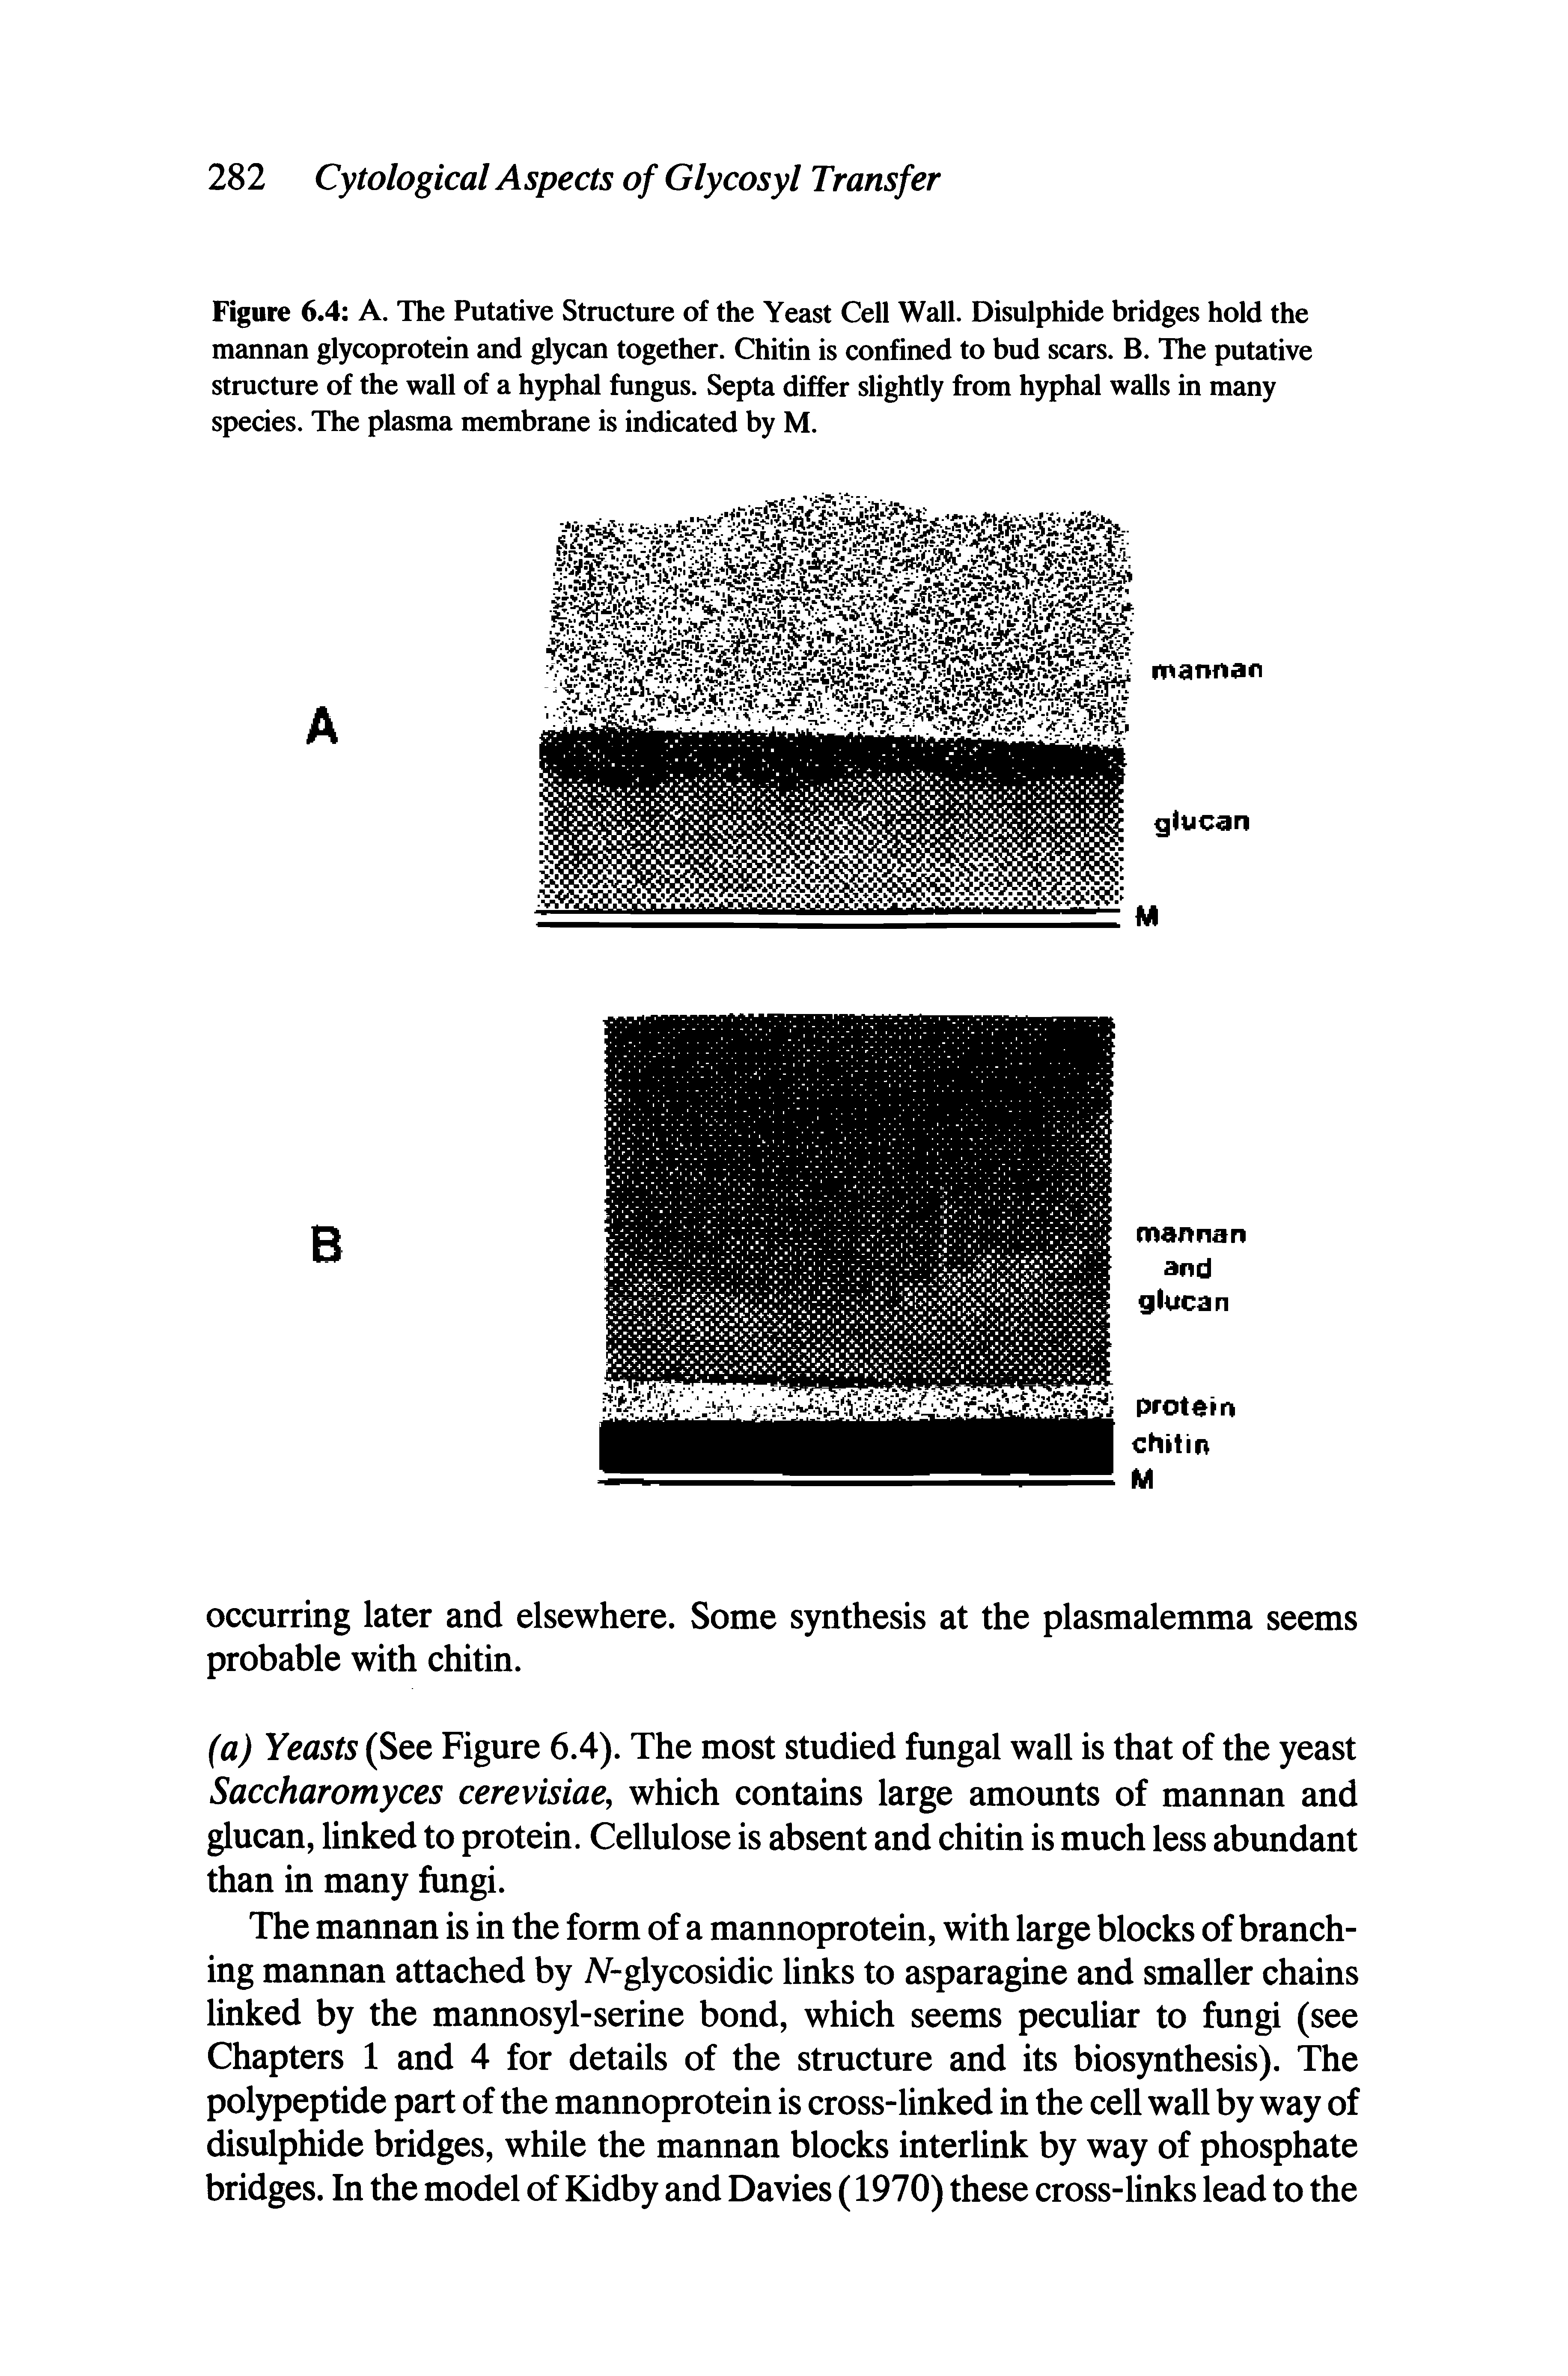 Figure 6.4 A. The Putative Structure of the Yeast Cell Wall. Disulphide bridges hold the mannan glycoprotein and glycan together. Chitin is confined to bud scars. B. The putative structure of the wall of a hyphal fungus. Septa differ slightly from hyphal walls in many species. The plasma membrane is indicated by M.